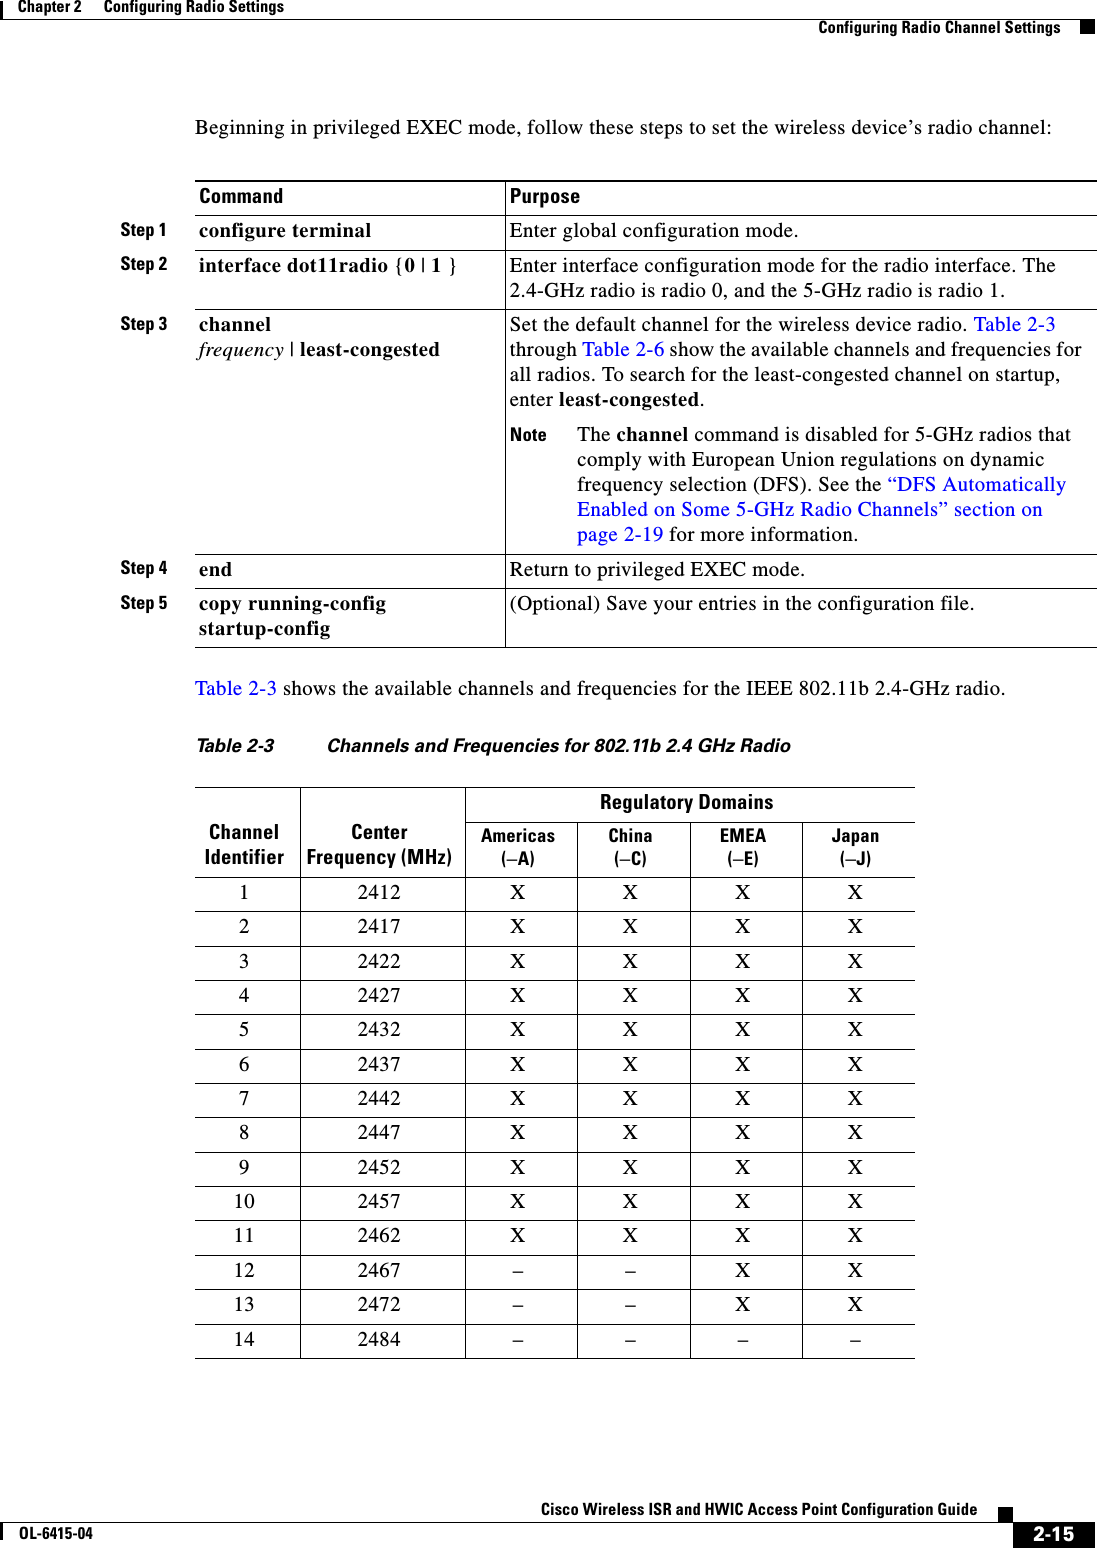  2-15Cisco Wireless ISR and HWIC Access Point Configuration GuideOL-6415-04Chapter 2      Configuring Radio Settings  Configuring Radio Channel SettingsBeginning in privileged EXEC mode, follow these steps to set the wireless device’s radio channel:Table 2-3 shows the available channels and frequencies for the IEEE 802.11b 2.4-GHz radio.Ta b l e  2-3 Channels and Frequencies for 802.11b 2.4 GHz RadioCommand PurposeStep 1 configure terminal Enter global configuration mode.Step 2 interface dot11radio {0 | 1 }Enter interface configuration mode for the radio interface. The 2.4-GHz radio is radio 0, and the 5-GHz radio is radio 1.Step 3 channel frequency | least-congestedSet the default channel for the wireless device radio. Table 2-3 through Table 2-6 show the available channels and frequencies for all radios. To search for the least-congested channel on startup, enter least-congested.Note The channel command is disabled for 5-GHz radios that comply with European Union regulations on dynamic frequency selection (DFS). See the “DFS Automatically Enabled on Some 5-GHz Radio Channels” section on page 2-19 for more information.Step 4 end Return to privileged EXEC mode.Step 5 copy running-config startup-config(Optional) Save your entries in the configuration file.Channel IdentifierCenter Frequency (MHz)Regulatory DomainsAmericas (–A)China(–C)EMEA(–E)Japan(–J)12412 XXXX22417 XXXX32422 XXXX42427 XXXX52432 XXXX62437 XXXX72442 XXXX82447 XXXX92452 XXXX10 2457 XXXX11 2462 XXXX12 2467 – – X X13 2472 – – X X14 2484 ––––